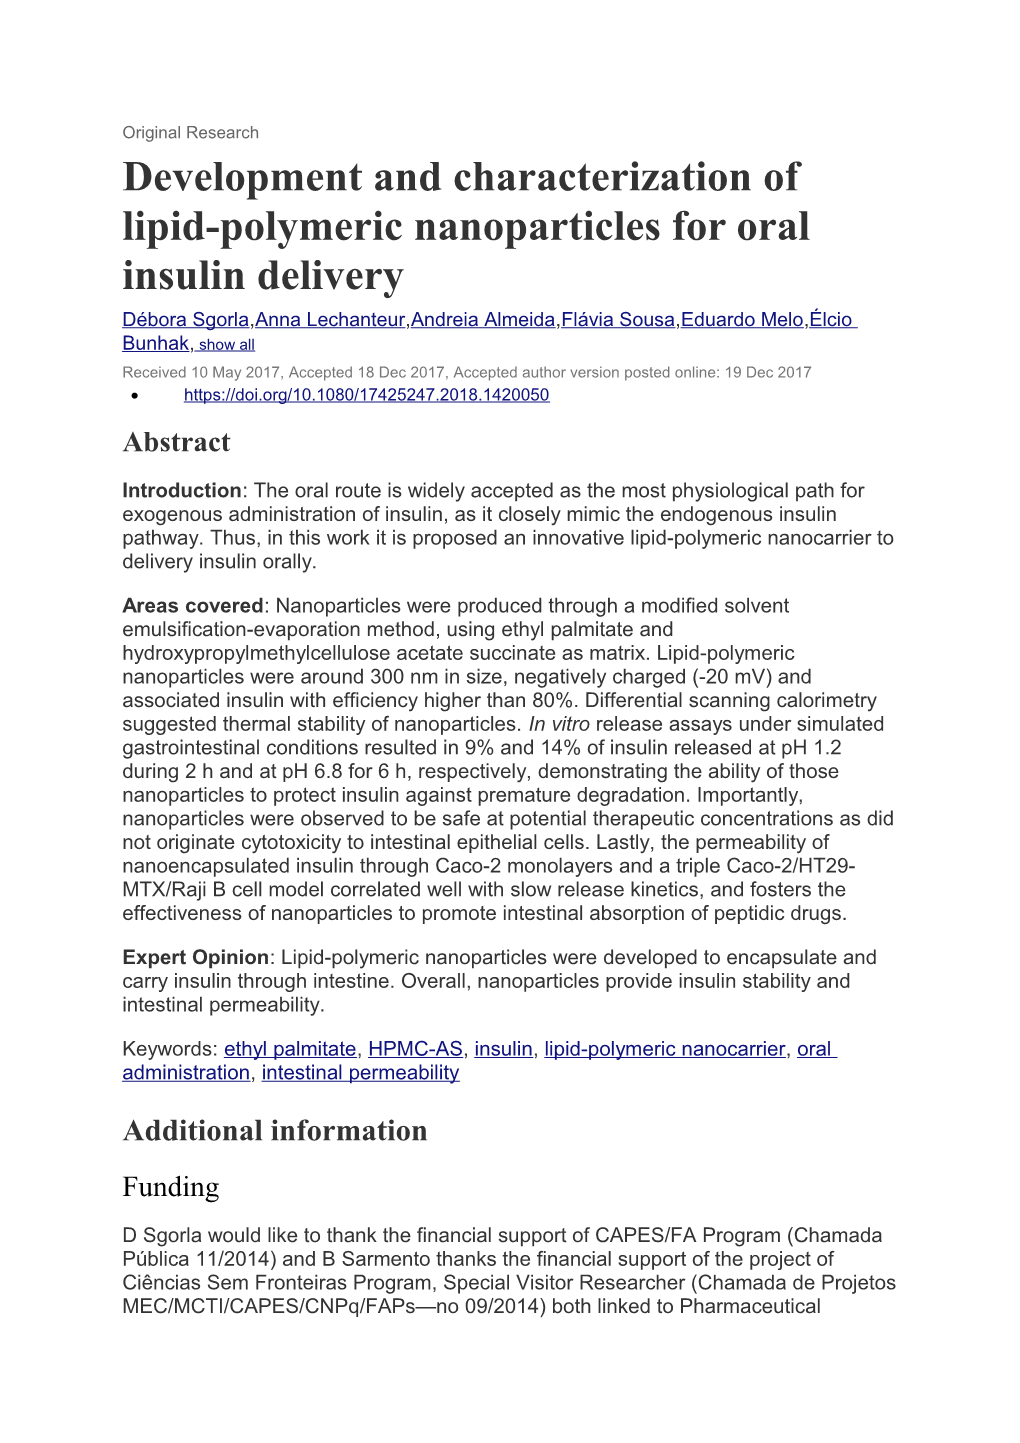 Development and Characterization of Lipid-Polymeric Nanoparticles for Oral Insulin Delivery